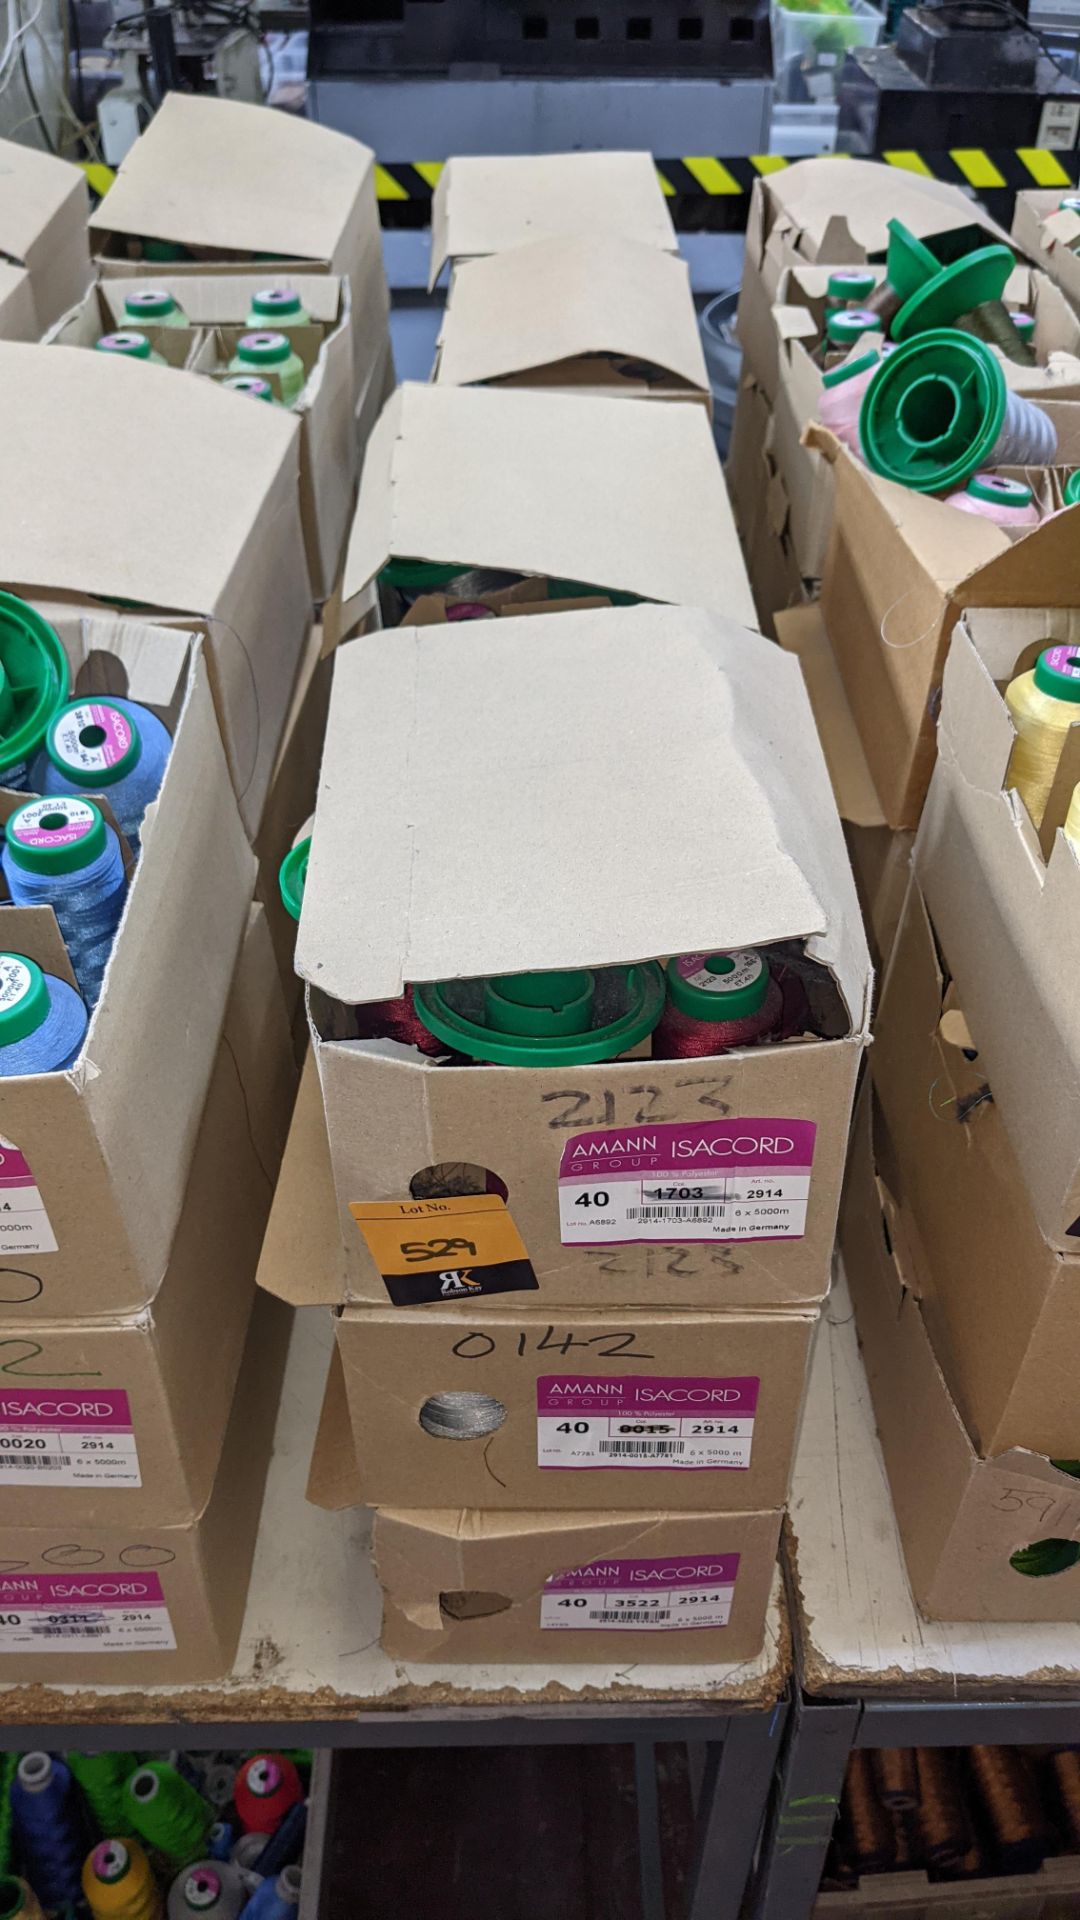 12 boxes of Ackermann Isacord (40) polyester thread